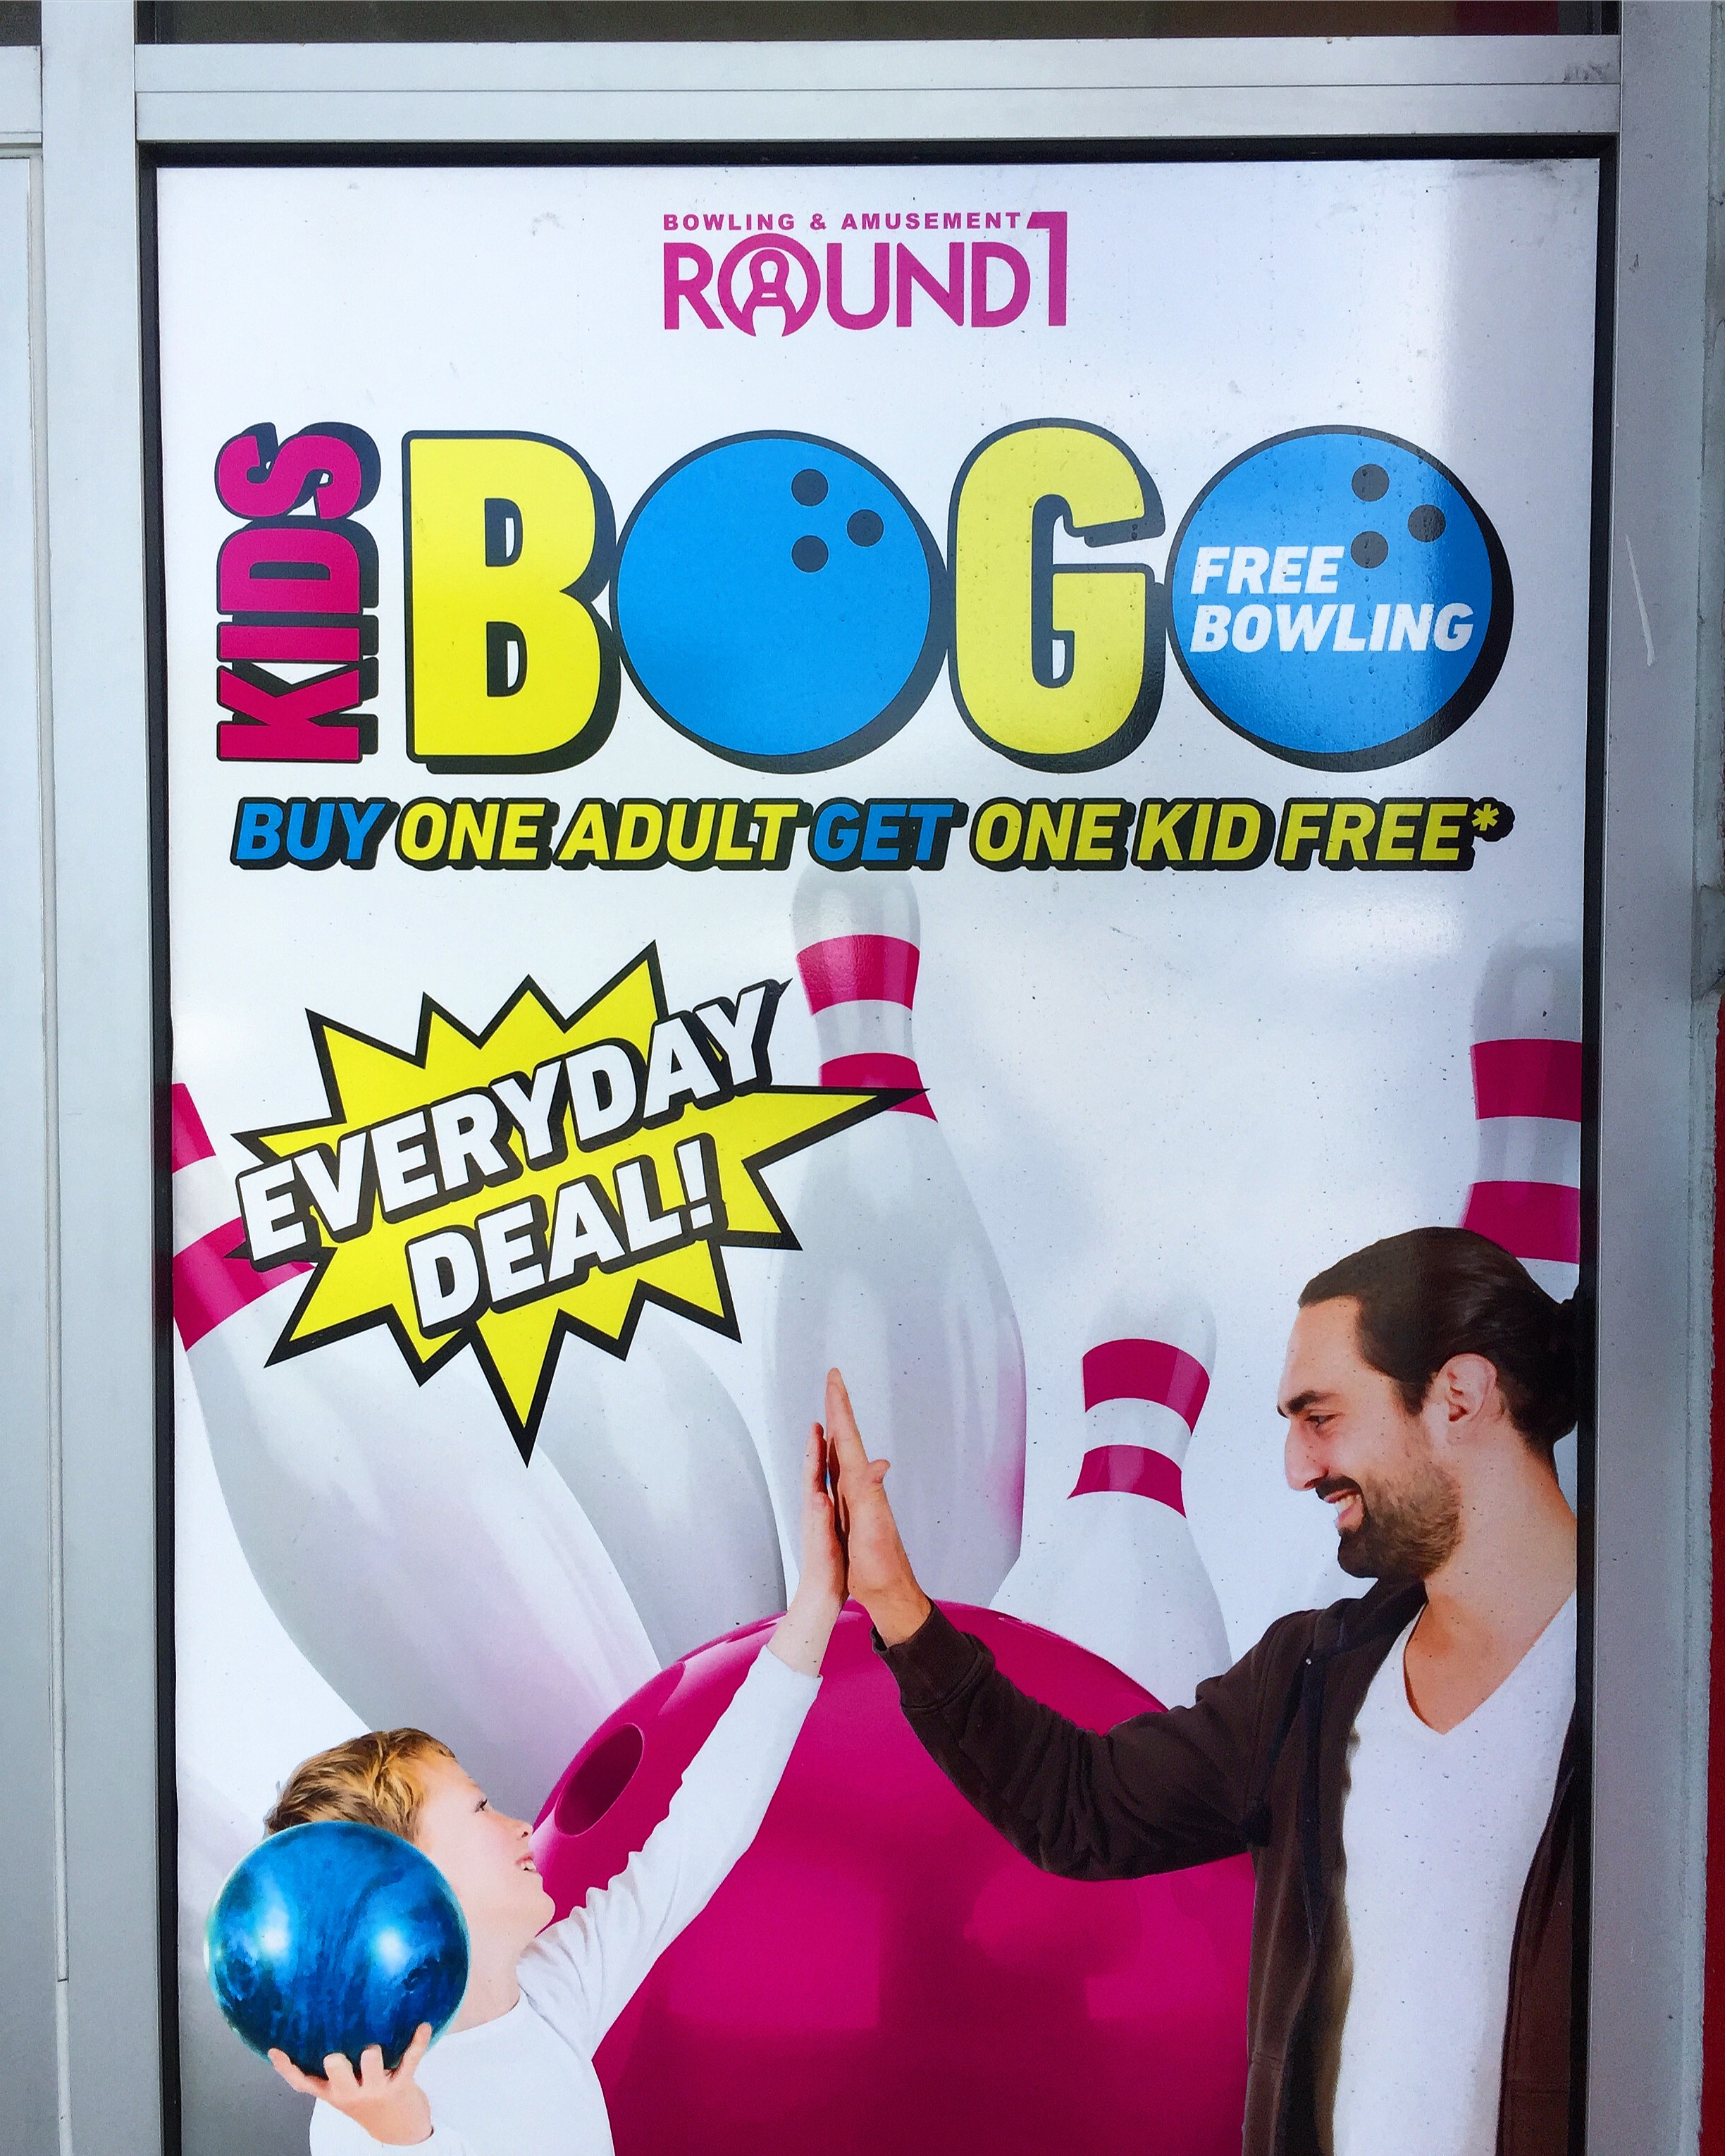 banner - Howling Serent Round Bog Free Bowling Buy One Adult Get One Kid Free Everyday 2 Deal!